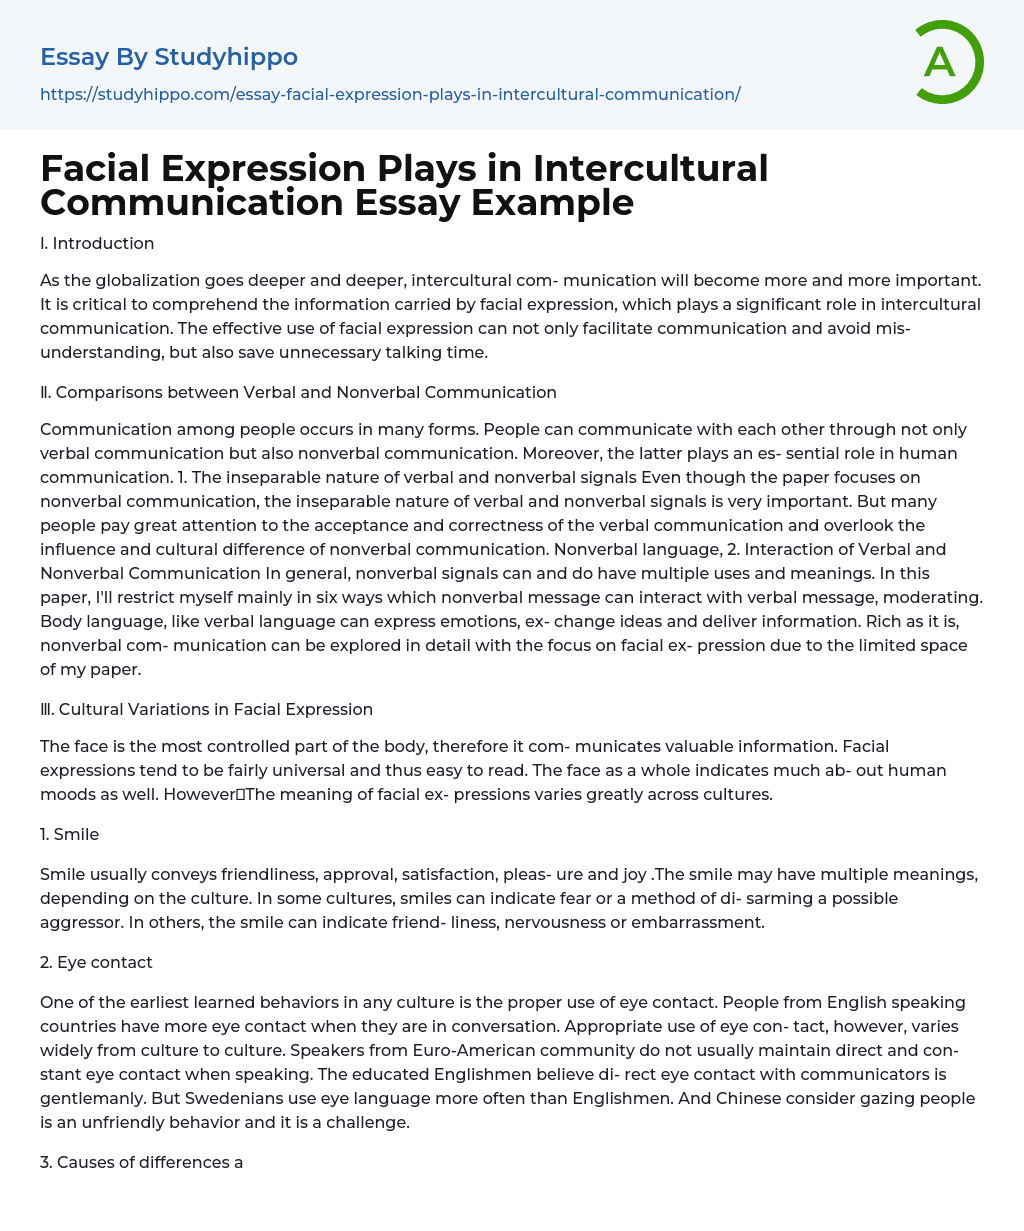 Facial Expression Plays in Intercultural Communication Essay Example